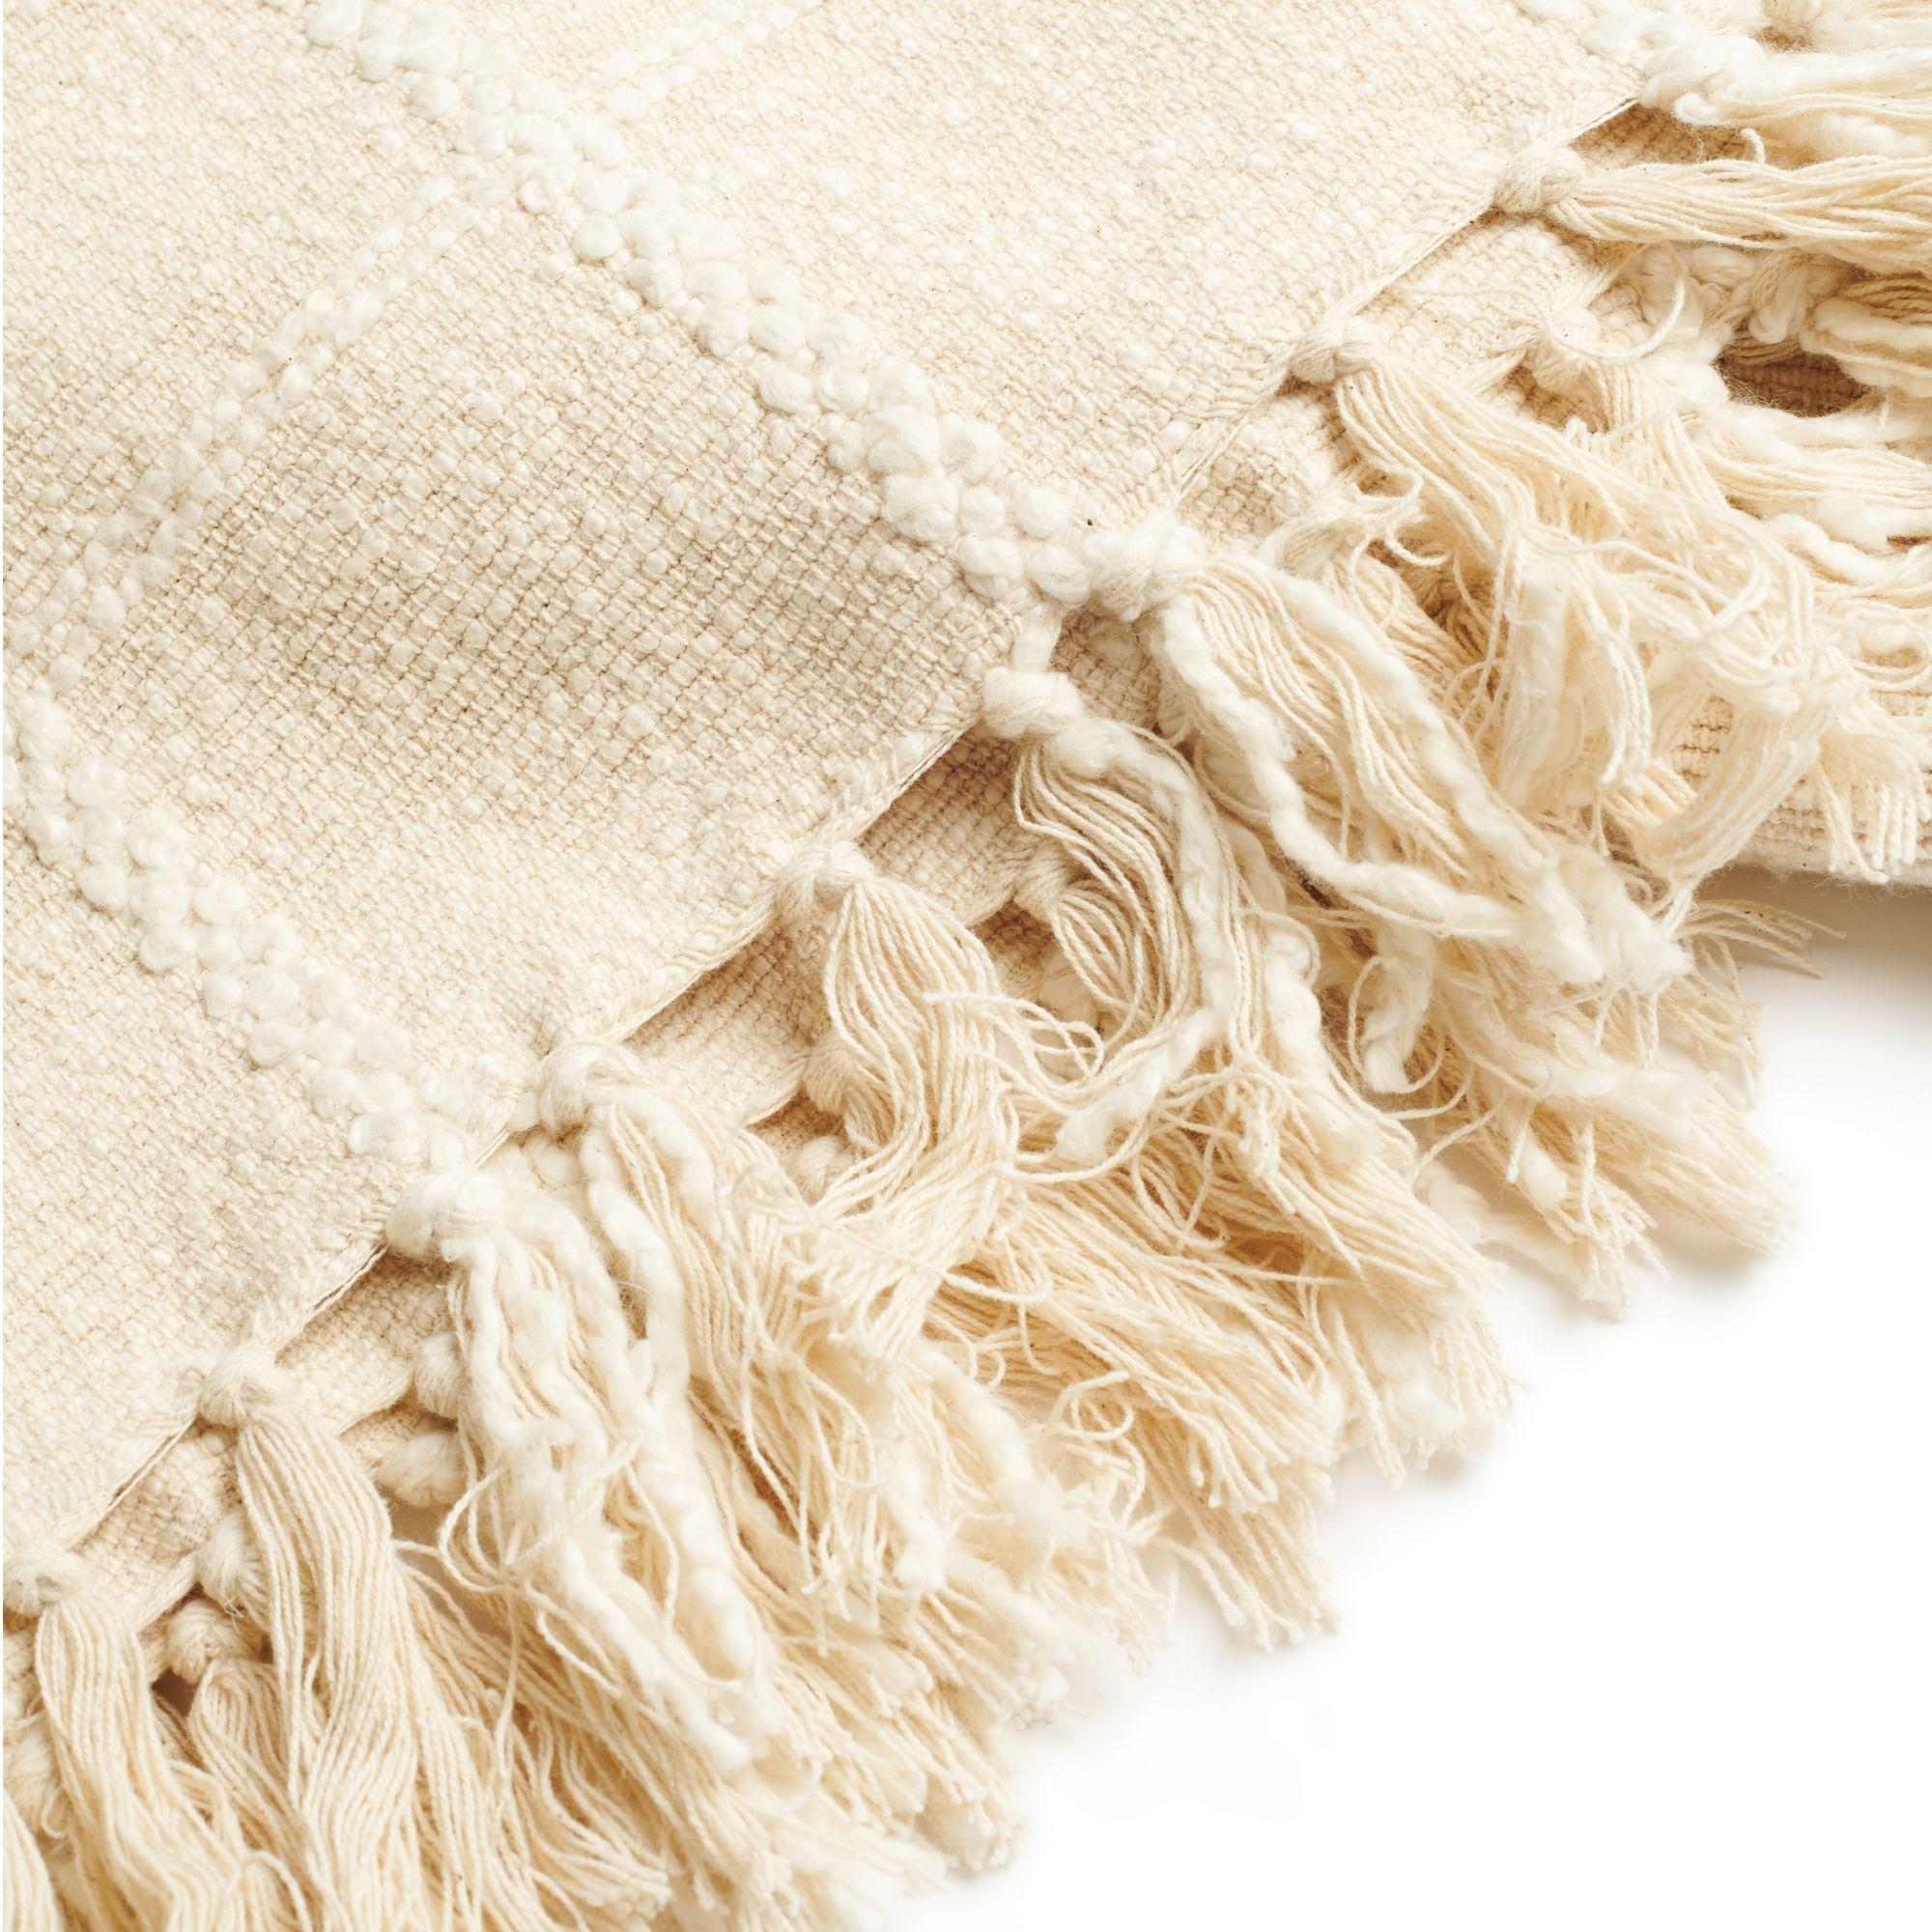 Sea Shell White Textured Weave Pure Cotton Handloom Throw In New Condition For Sale In Bloomfield Hills, MI